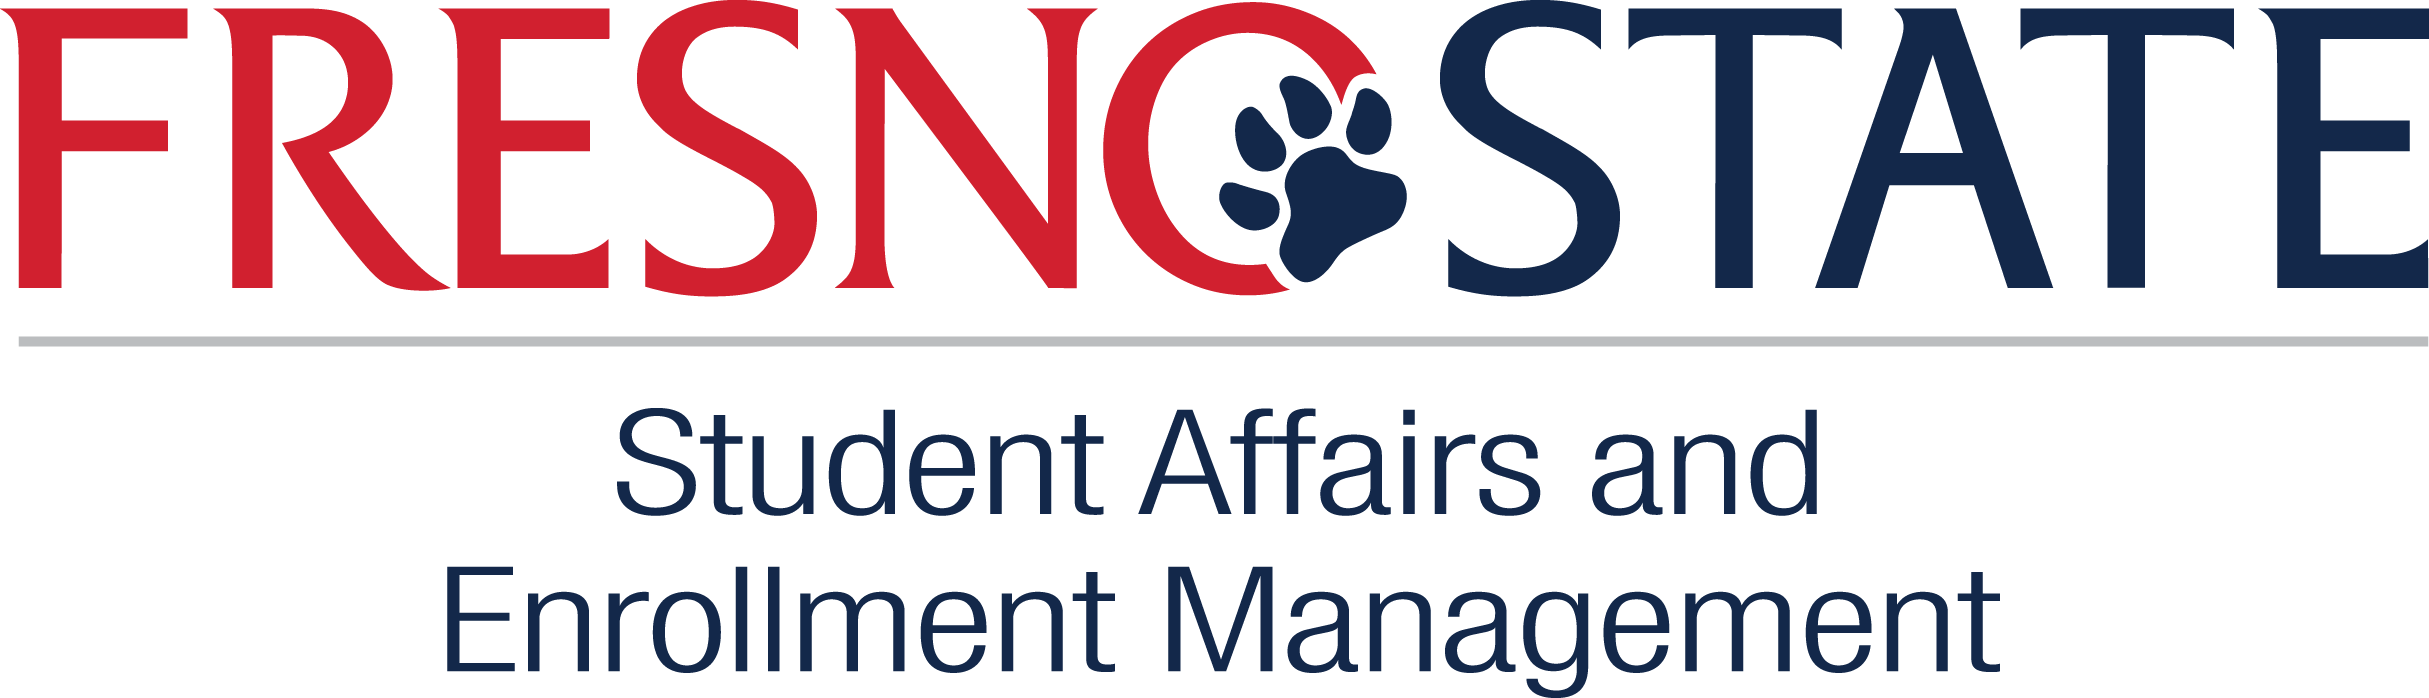 Red and Blue Fresno State Student Affairs and Enrollment Management Logo